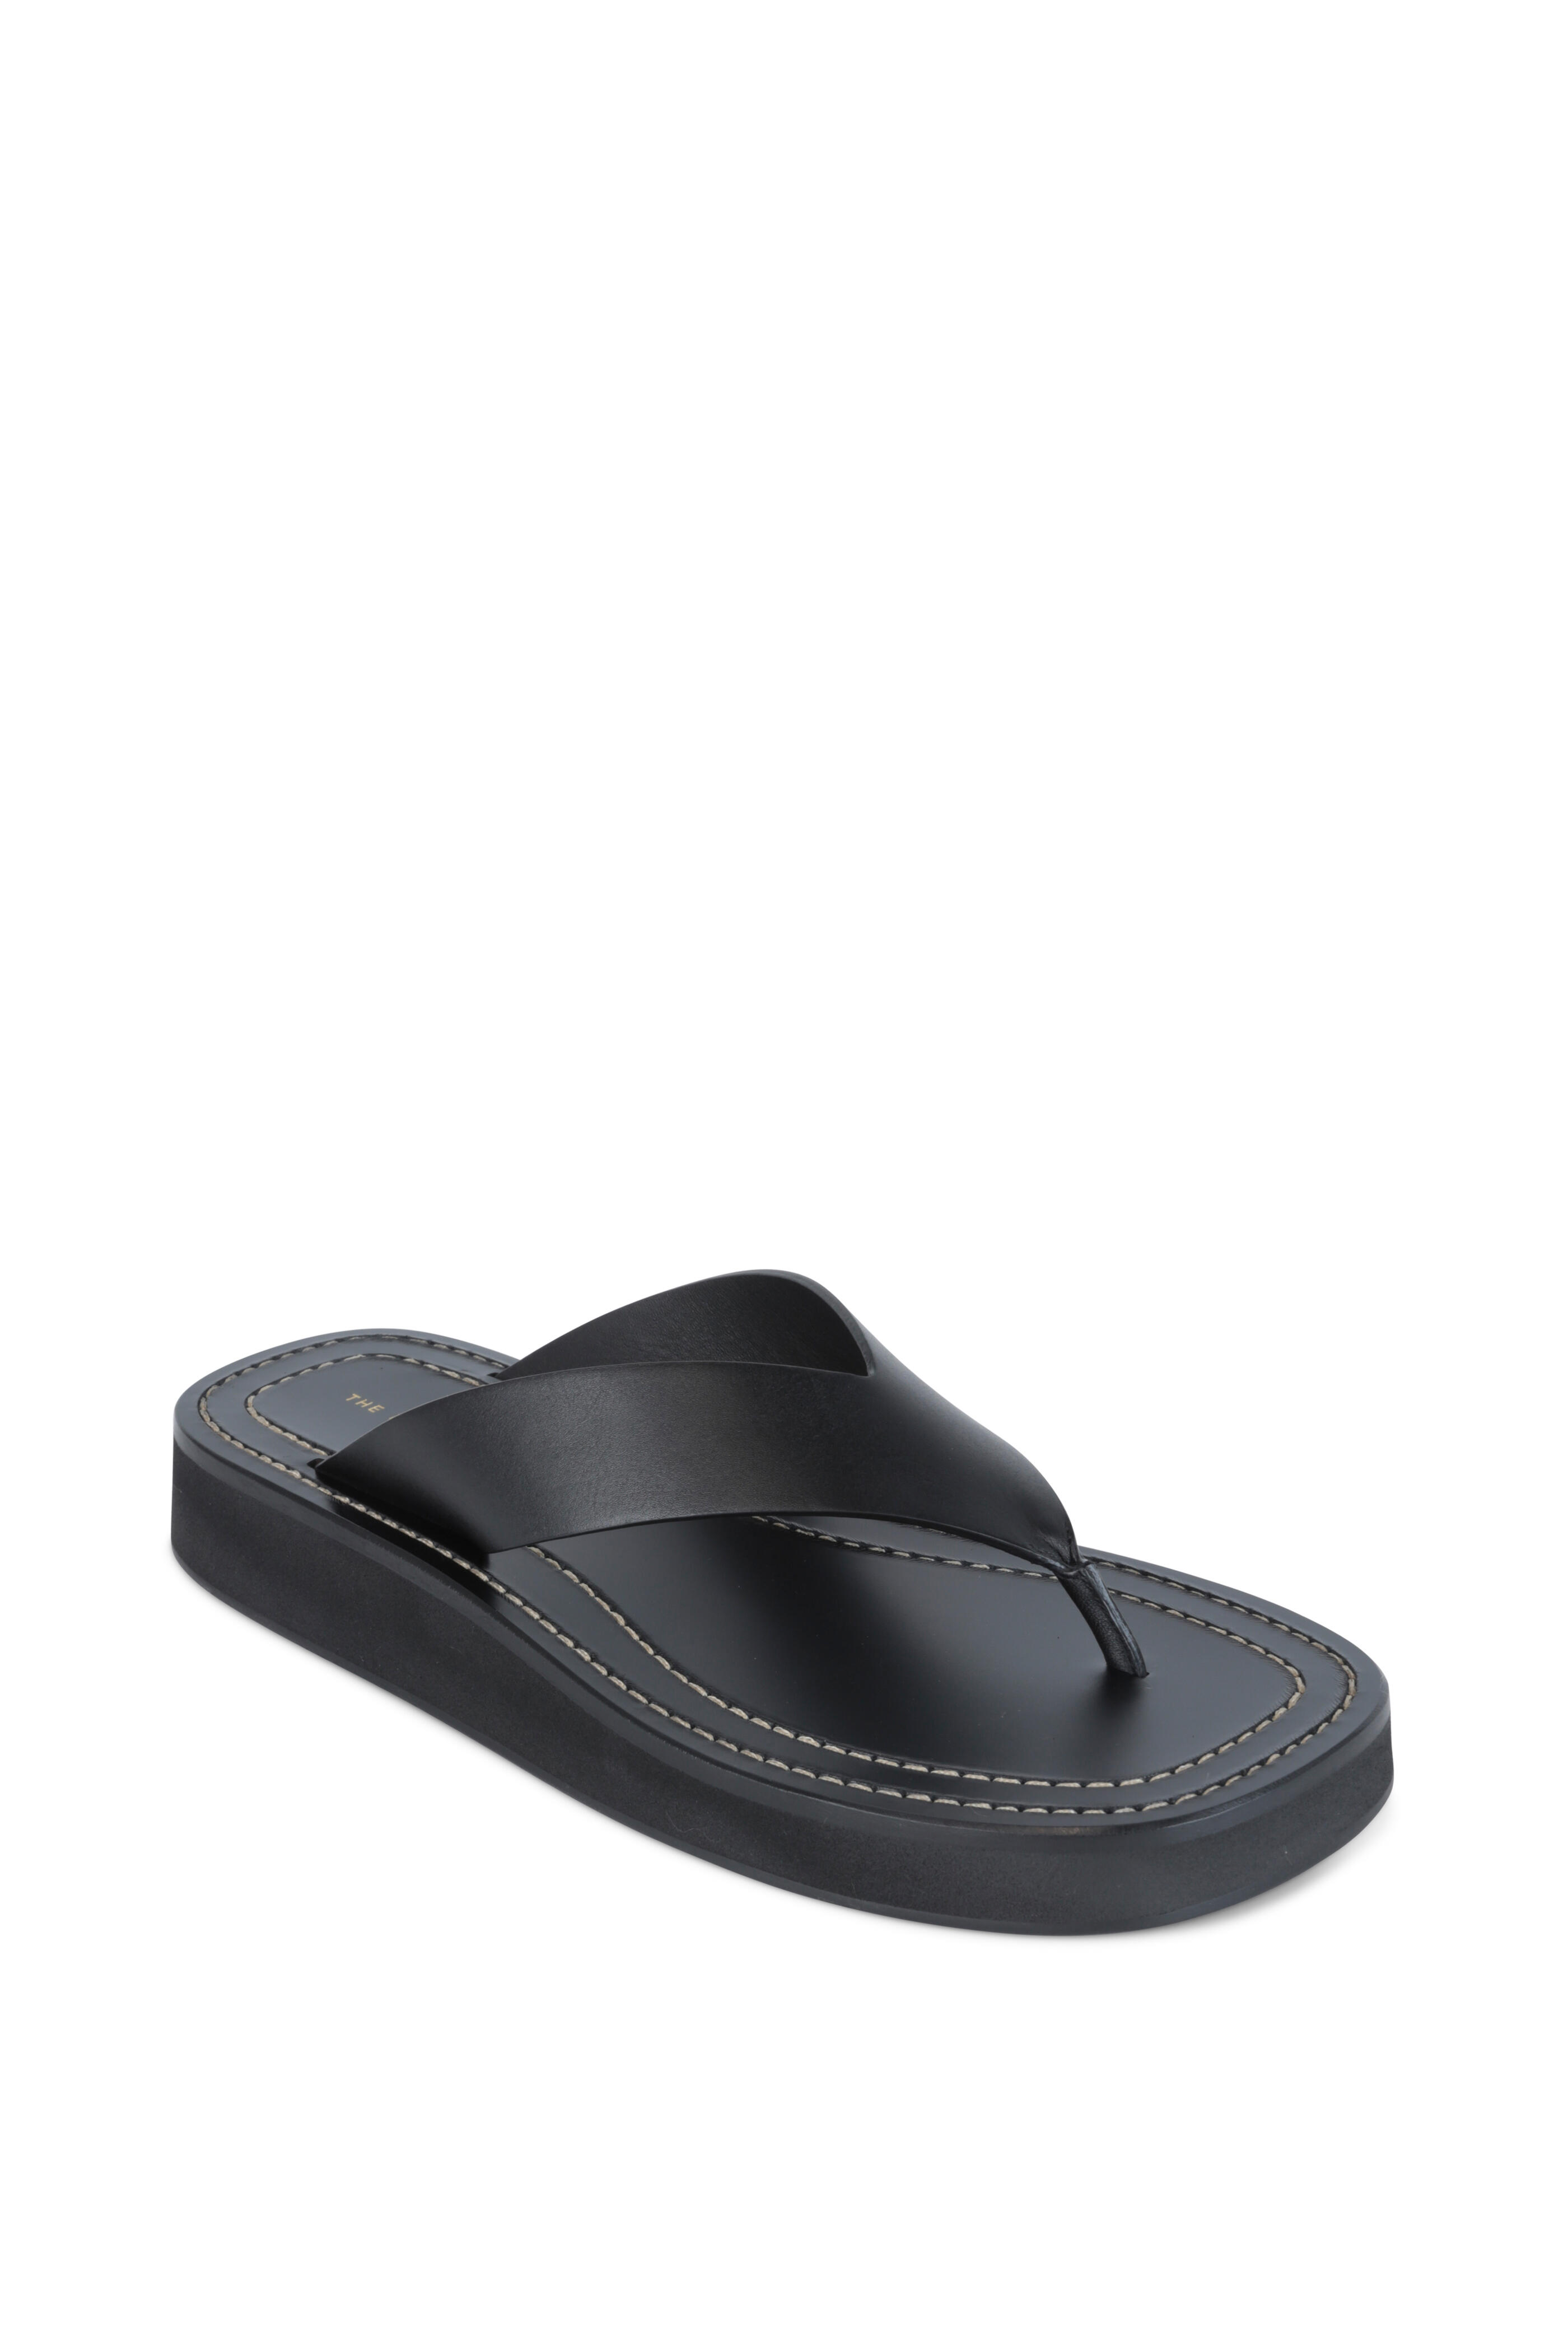 One Stud Calfskin Flat Thong Sandal for Woman in Black